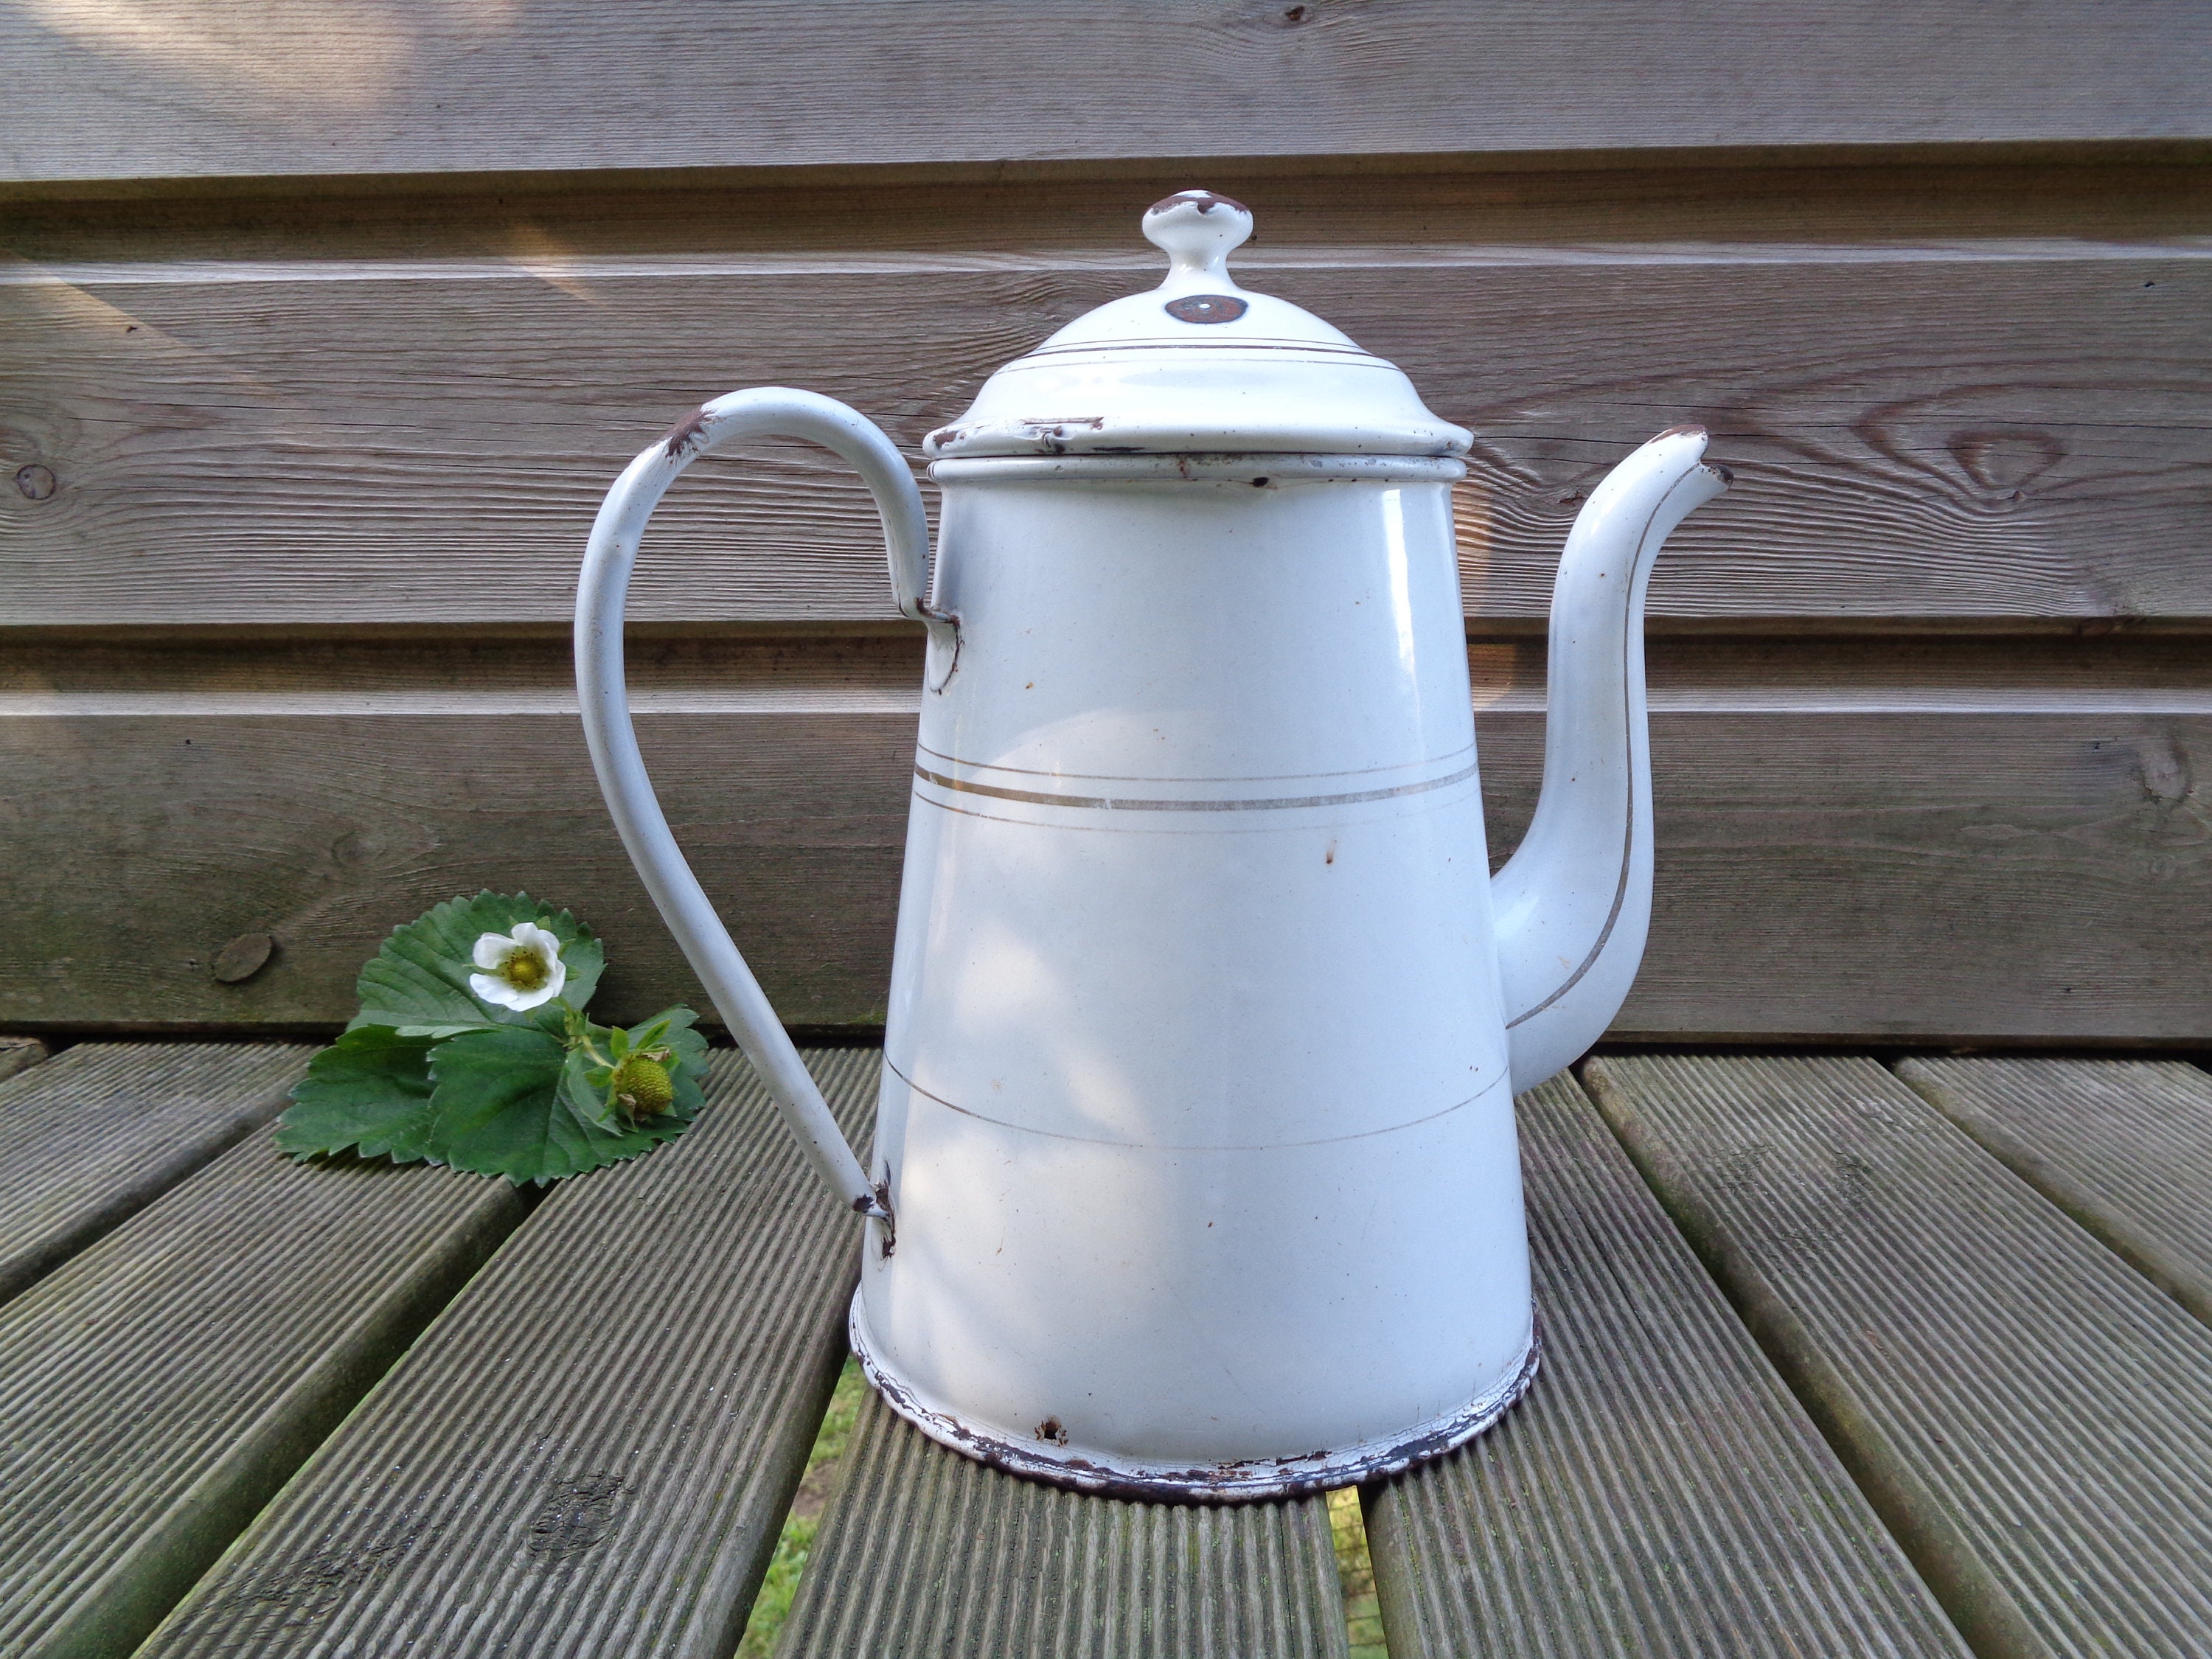 White Enamelled Coffee Maker, Old Coffee Pot, Old Shabby Chic